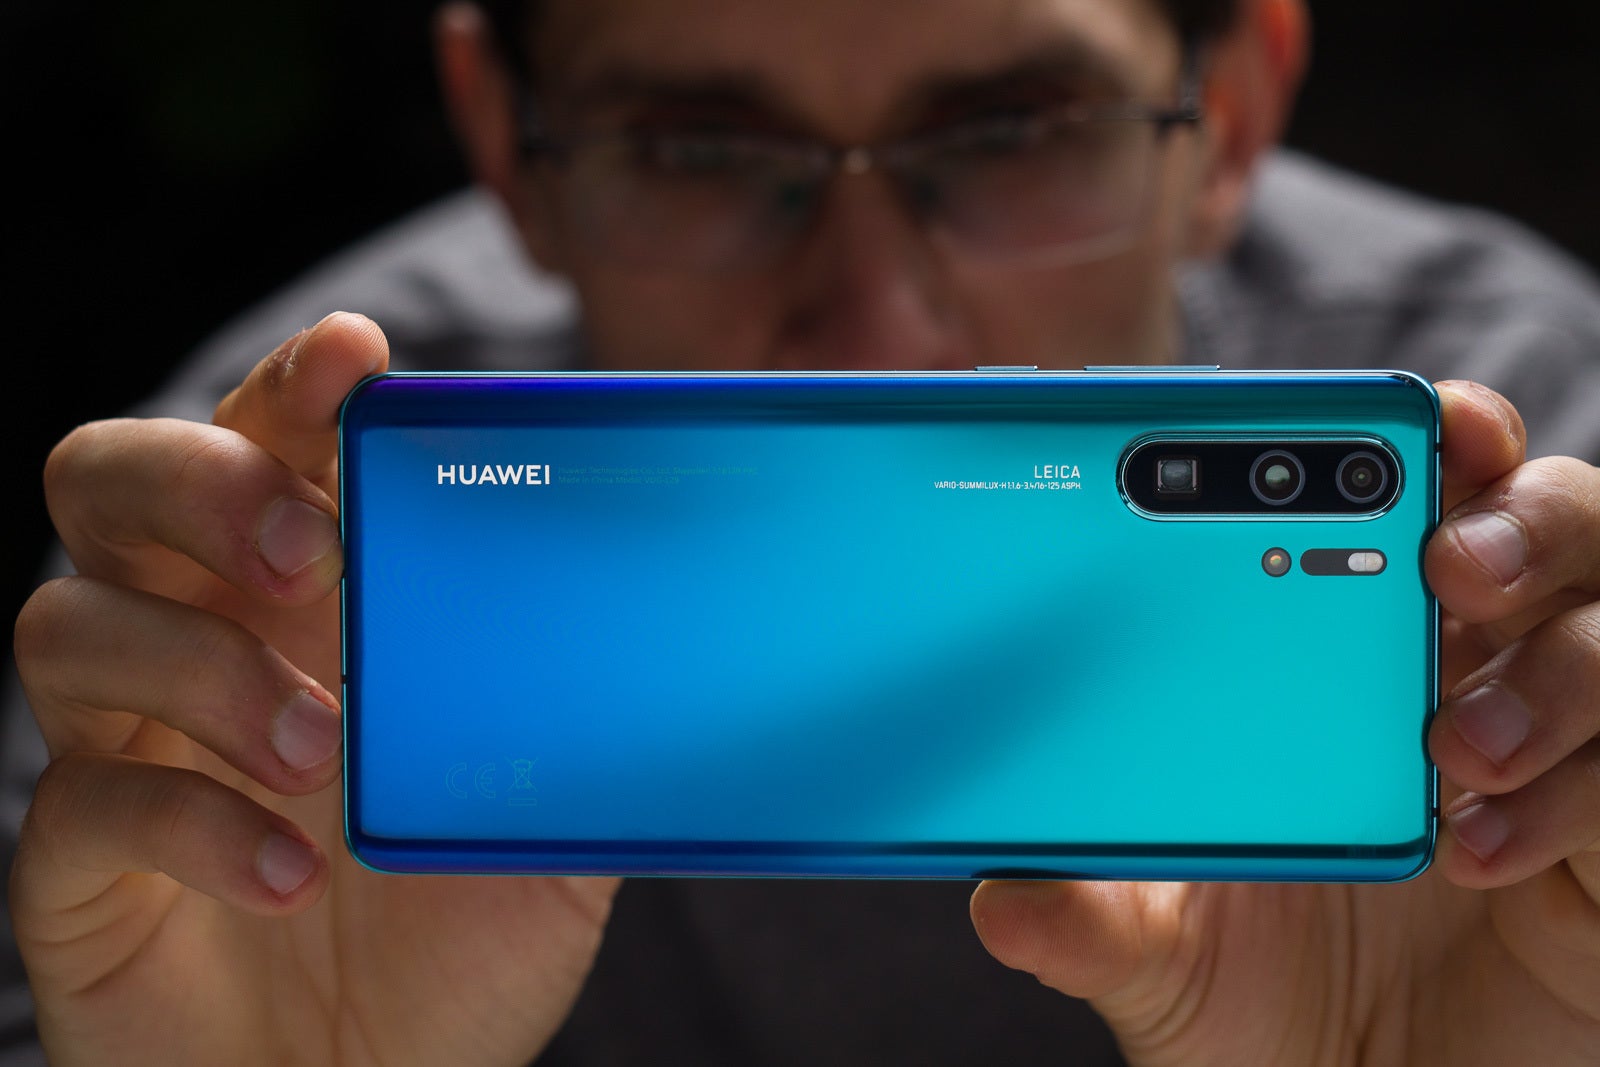 Night Mode will soon be a standard feature among flagships - The Galaxy Note 10 &amp; iPhone 11 are proof Huawei's an industry leader